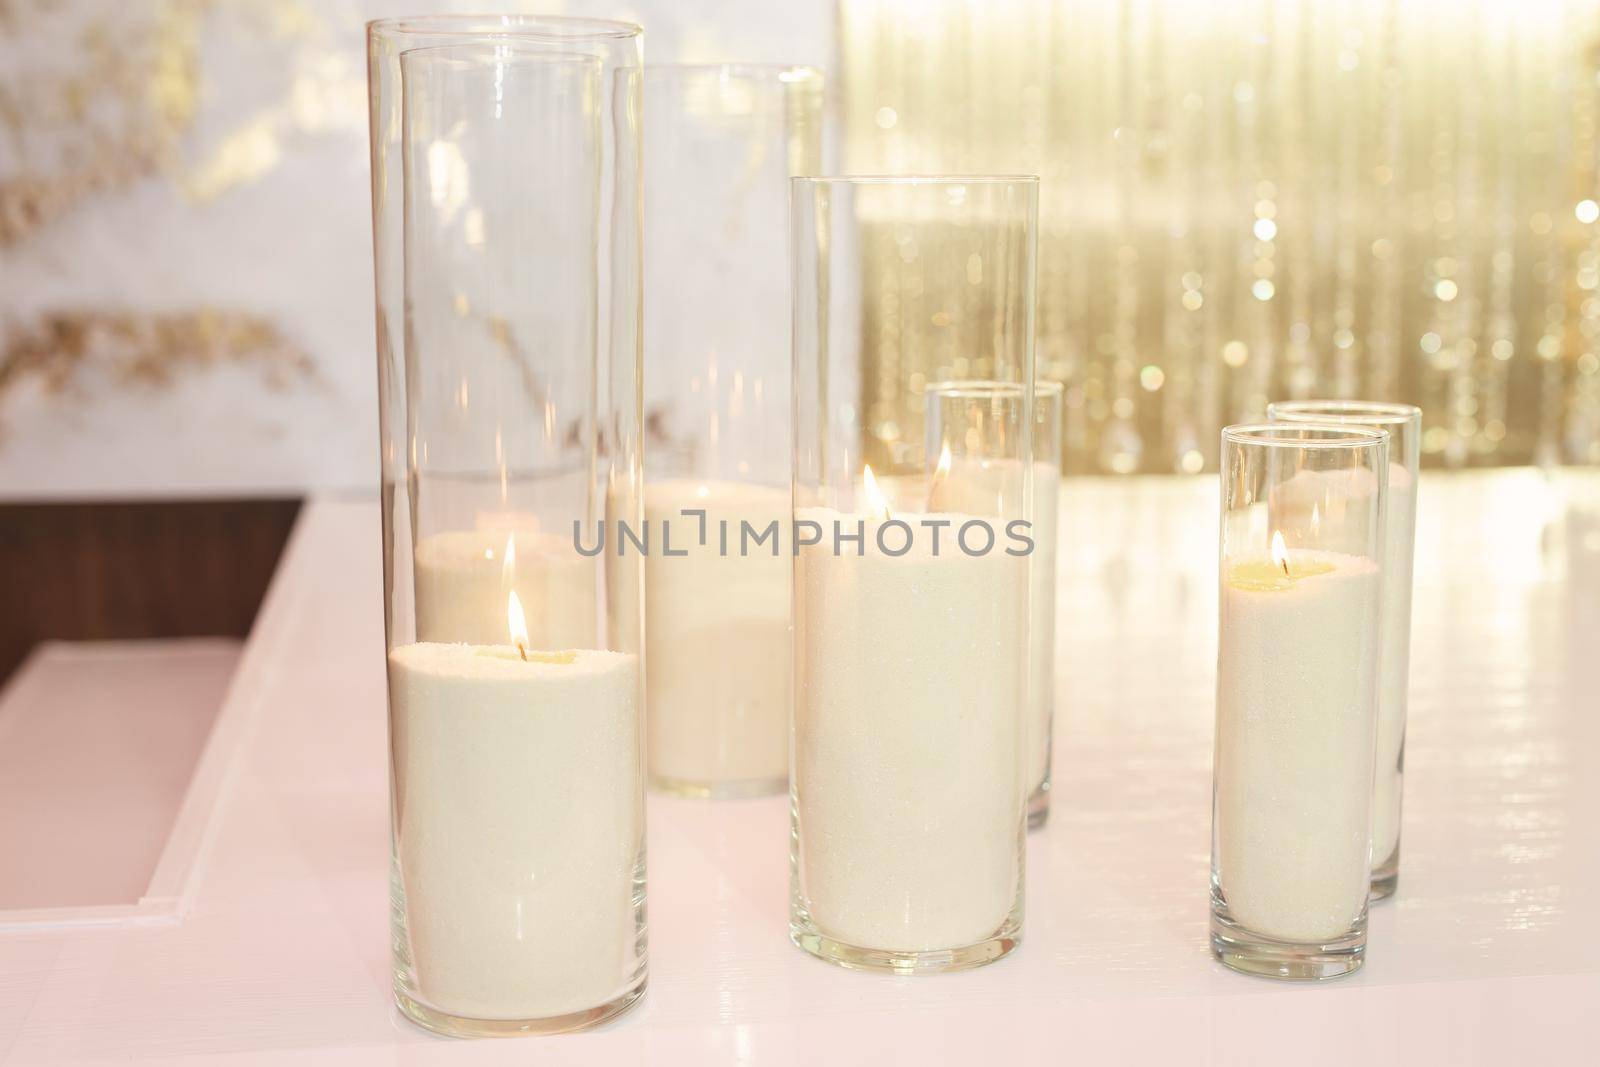 Wedding decor in white and gold style with candles and flowers by StudioPeace